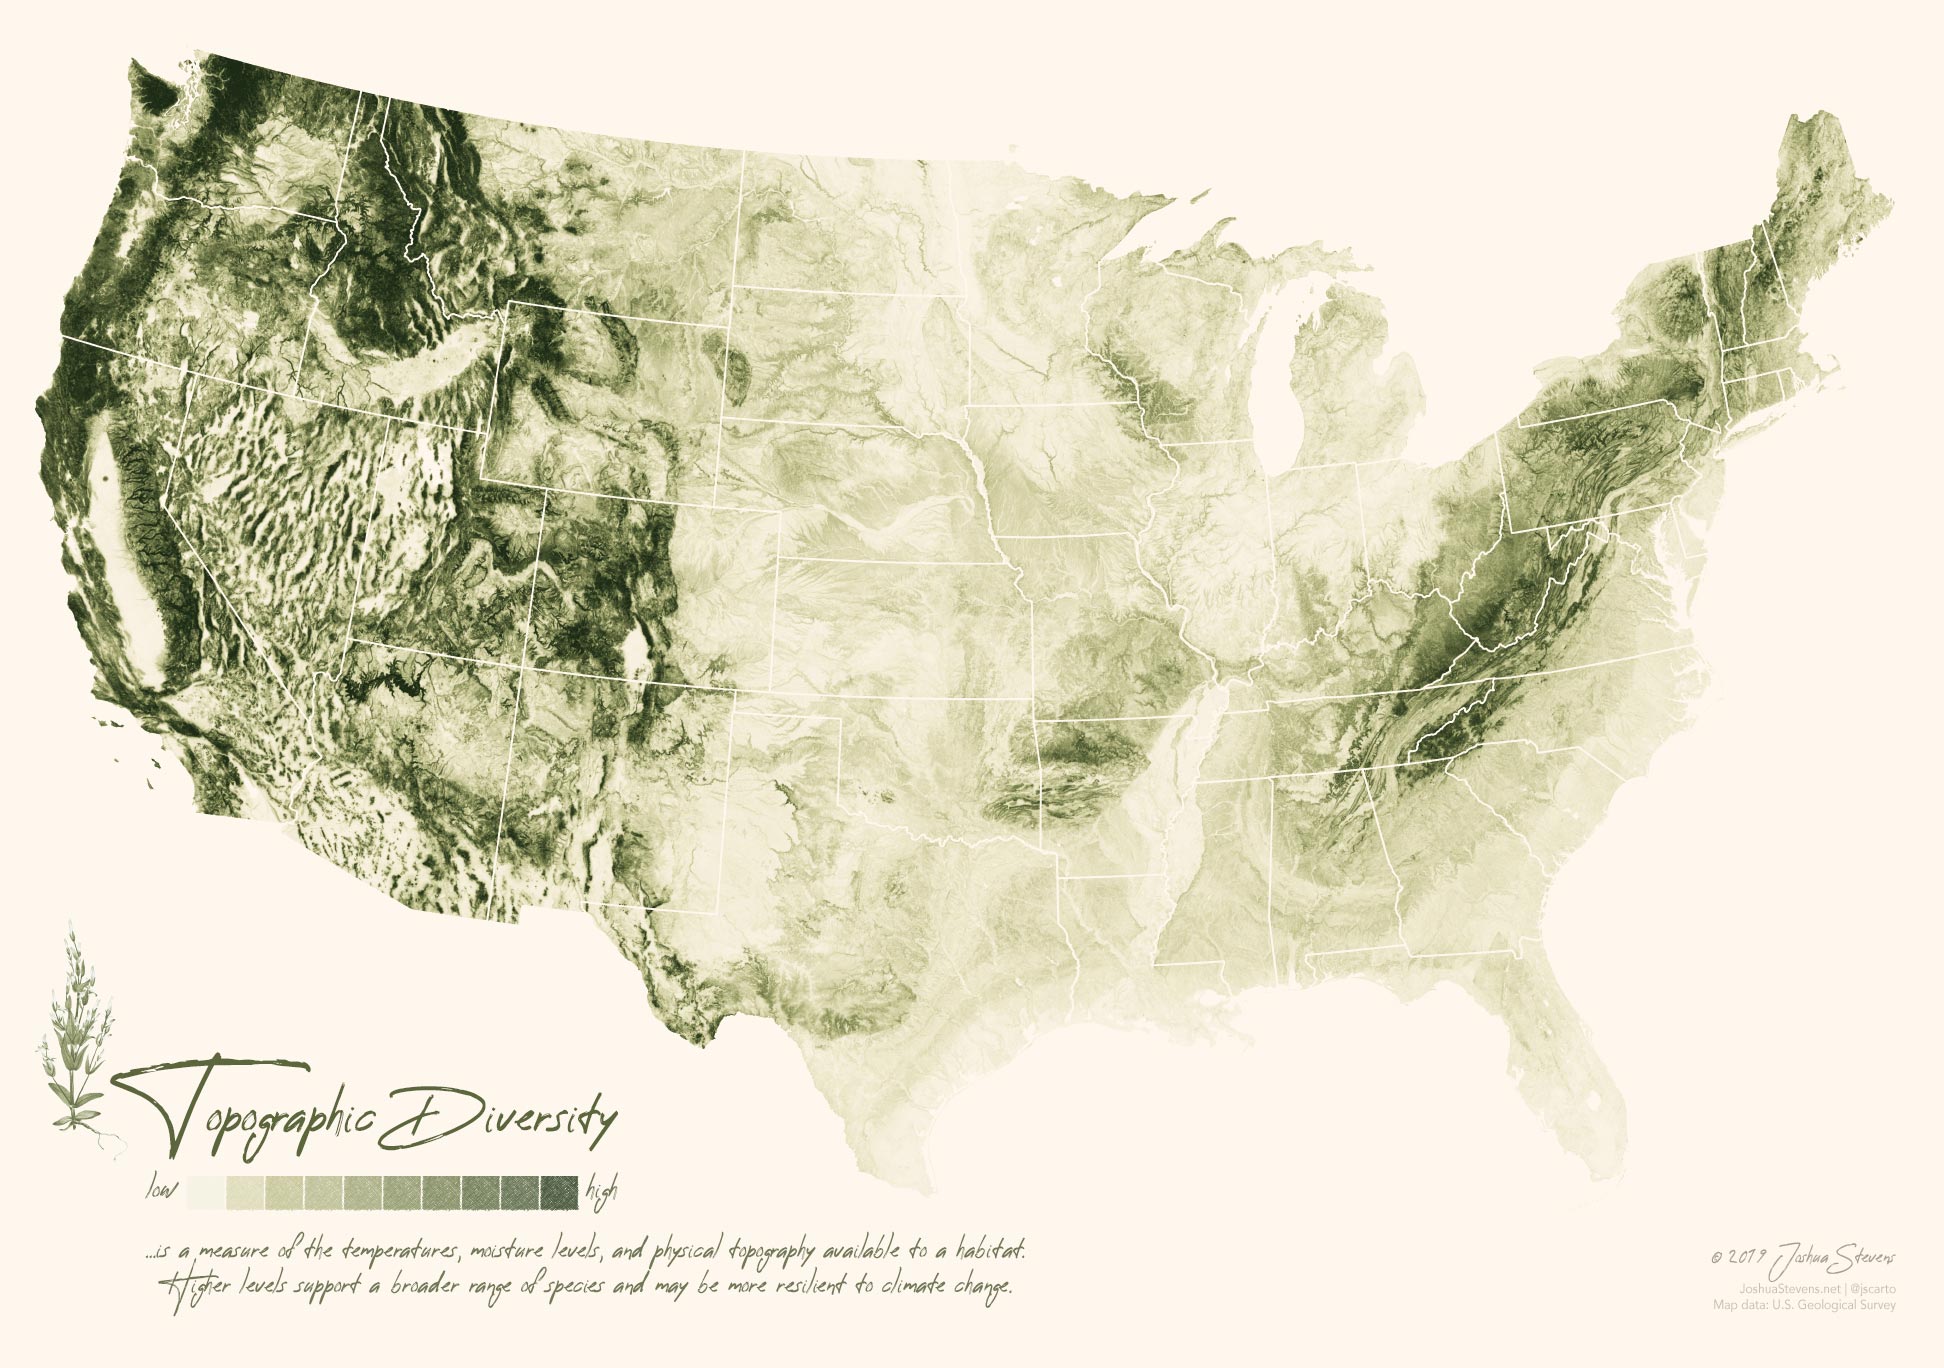 Map by Joshua Stevens of topographic diversity in the contiguous United States.